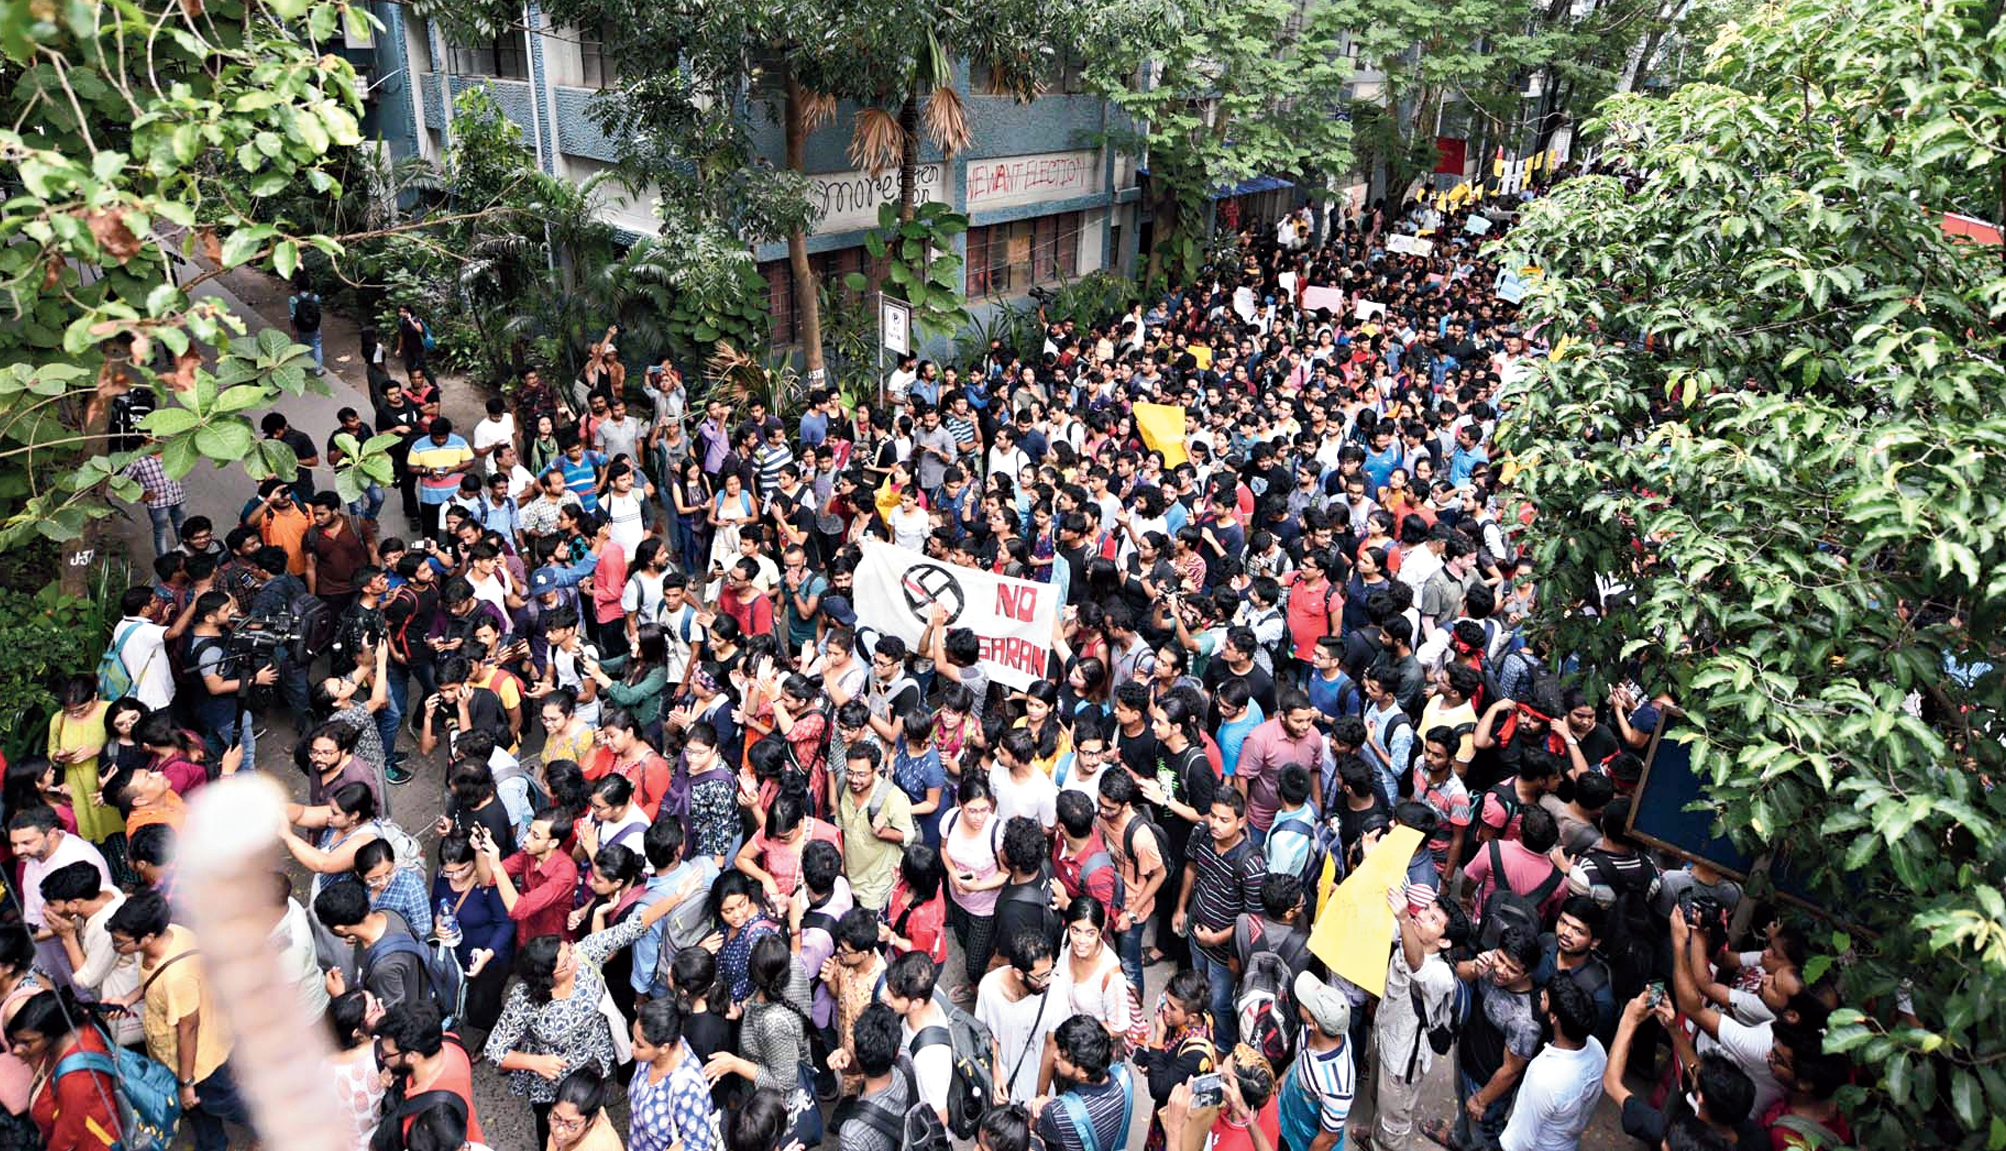 A protest rally by Jadavpur University students on Friday evening